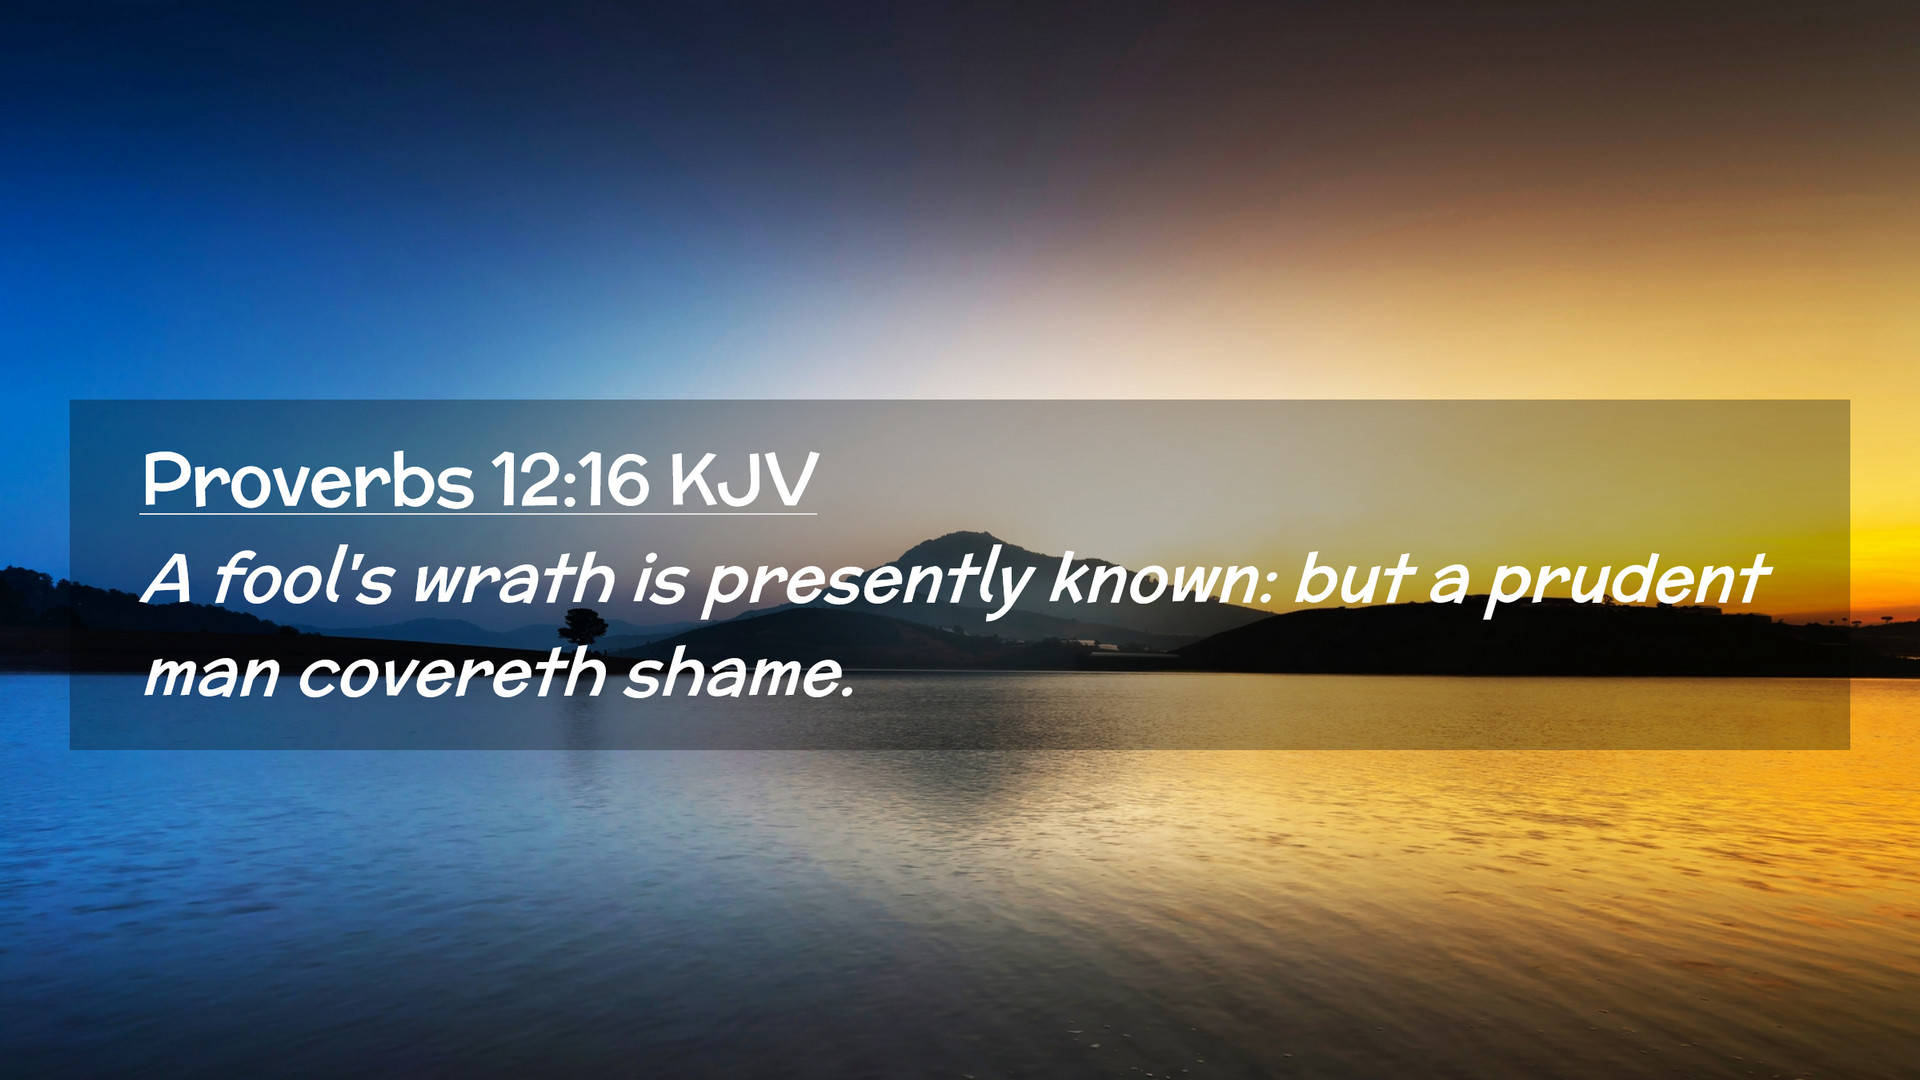 Prudent Person Covereth Shame Wallpaper